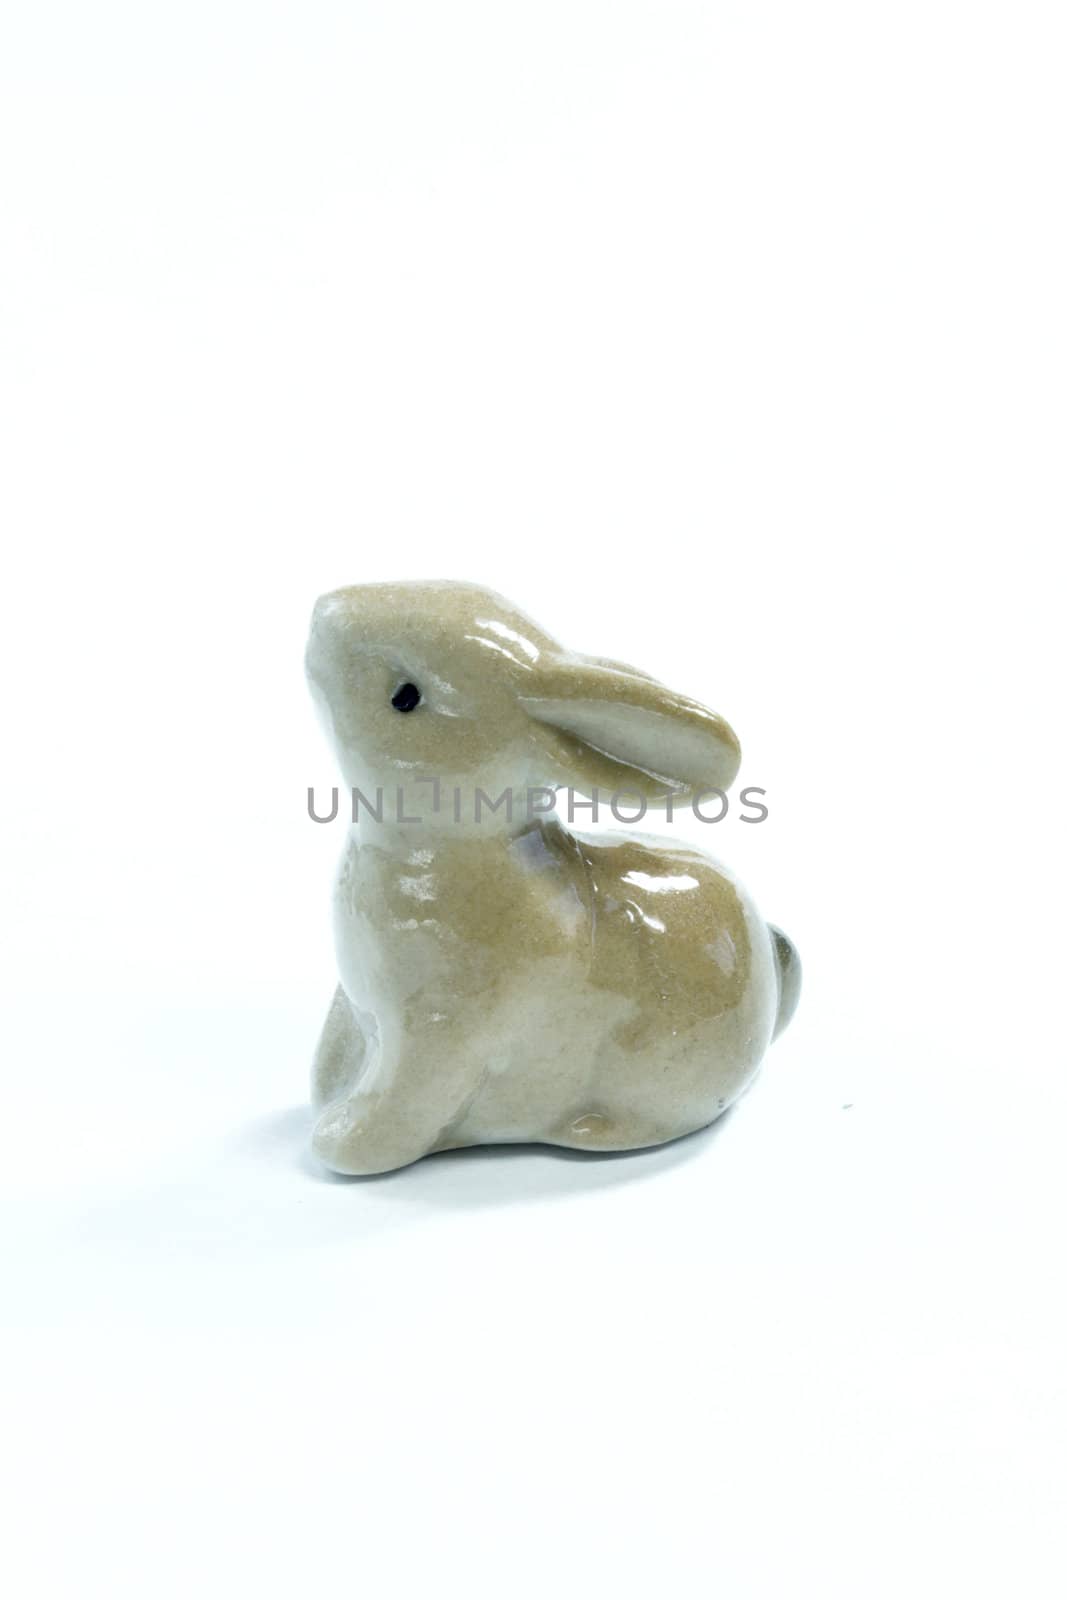 A little toy-rabbit on the white background